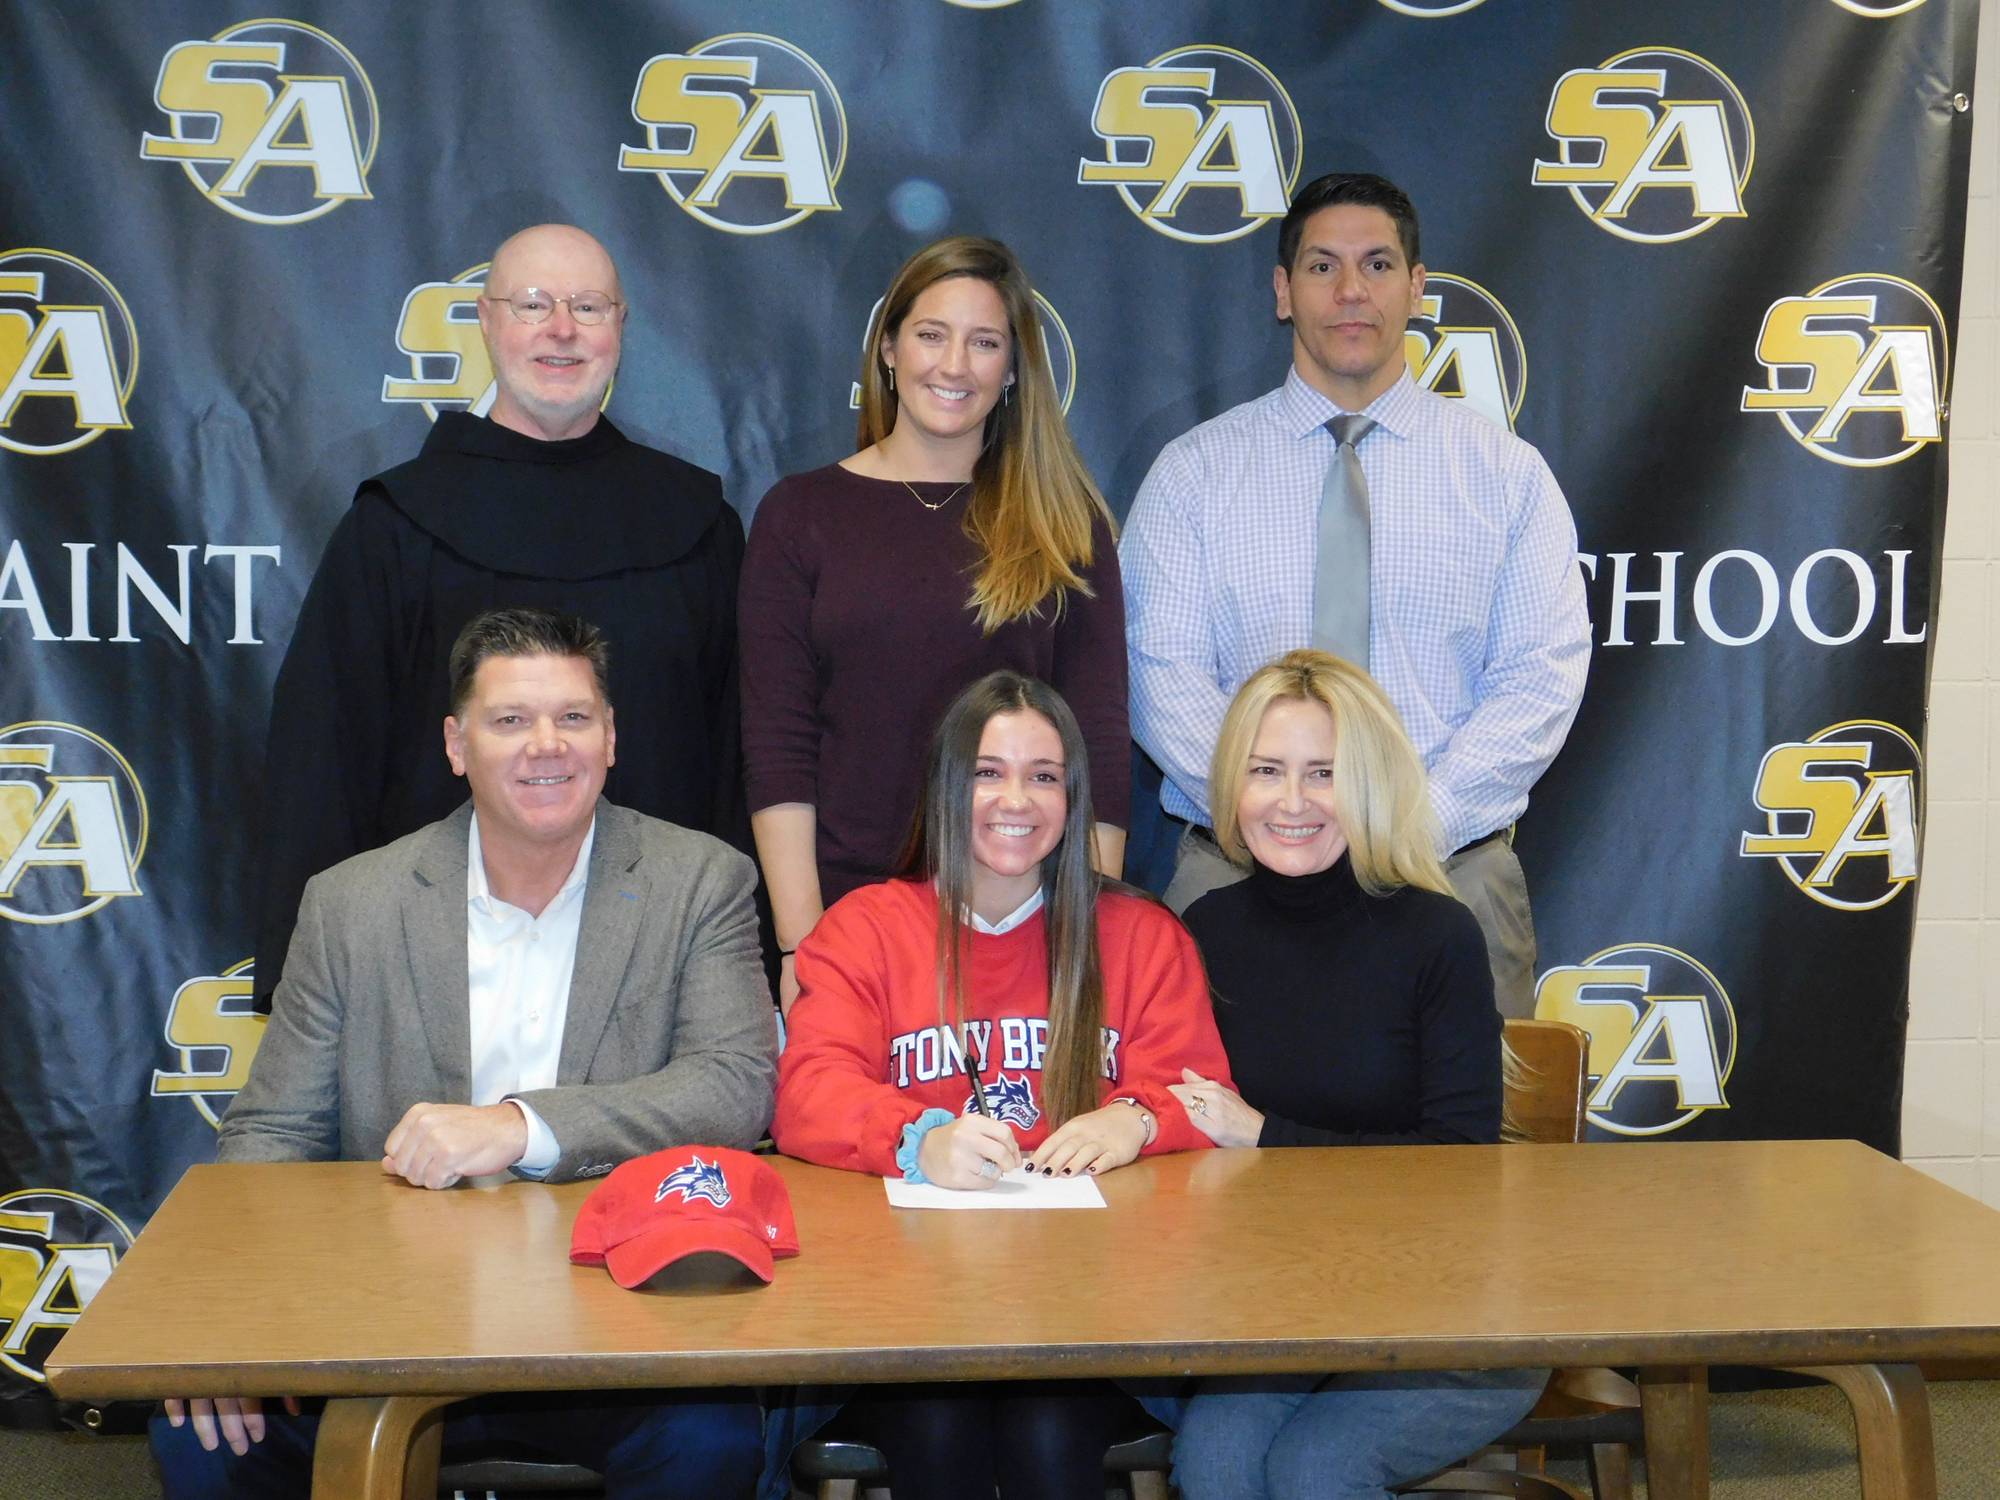 Congratulations to Charlotte Verhulst for committing to Stony Brook University to play Lacrosse 